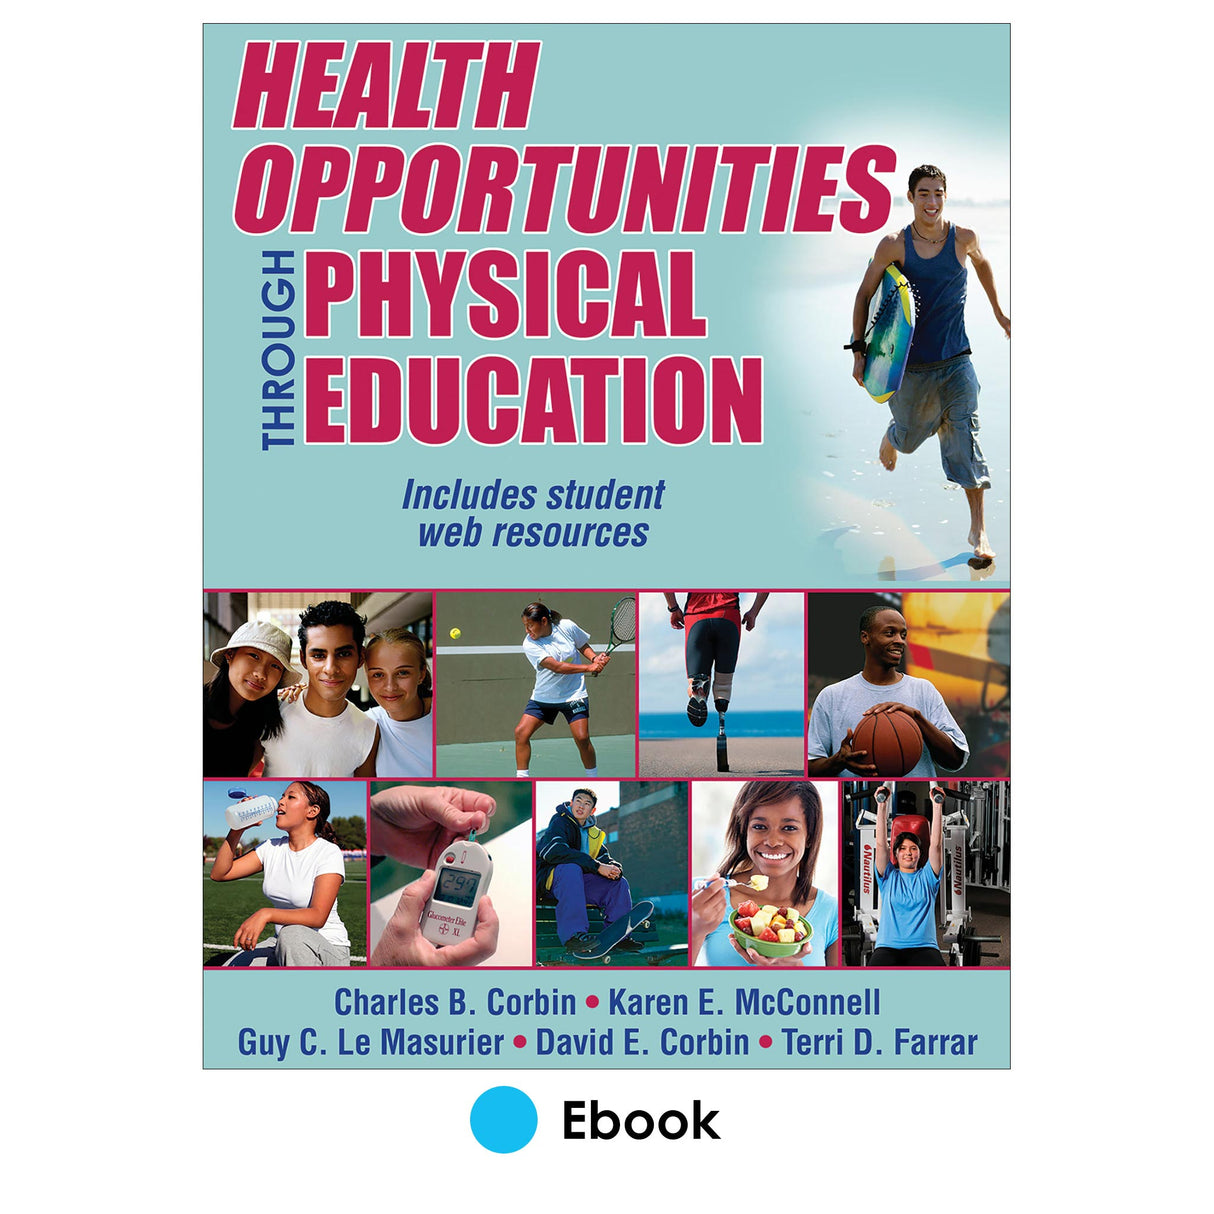 Health Opportunities Through Physical Education PDF With Web Resources